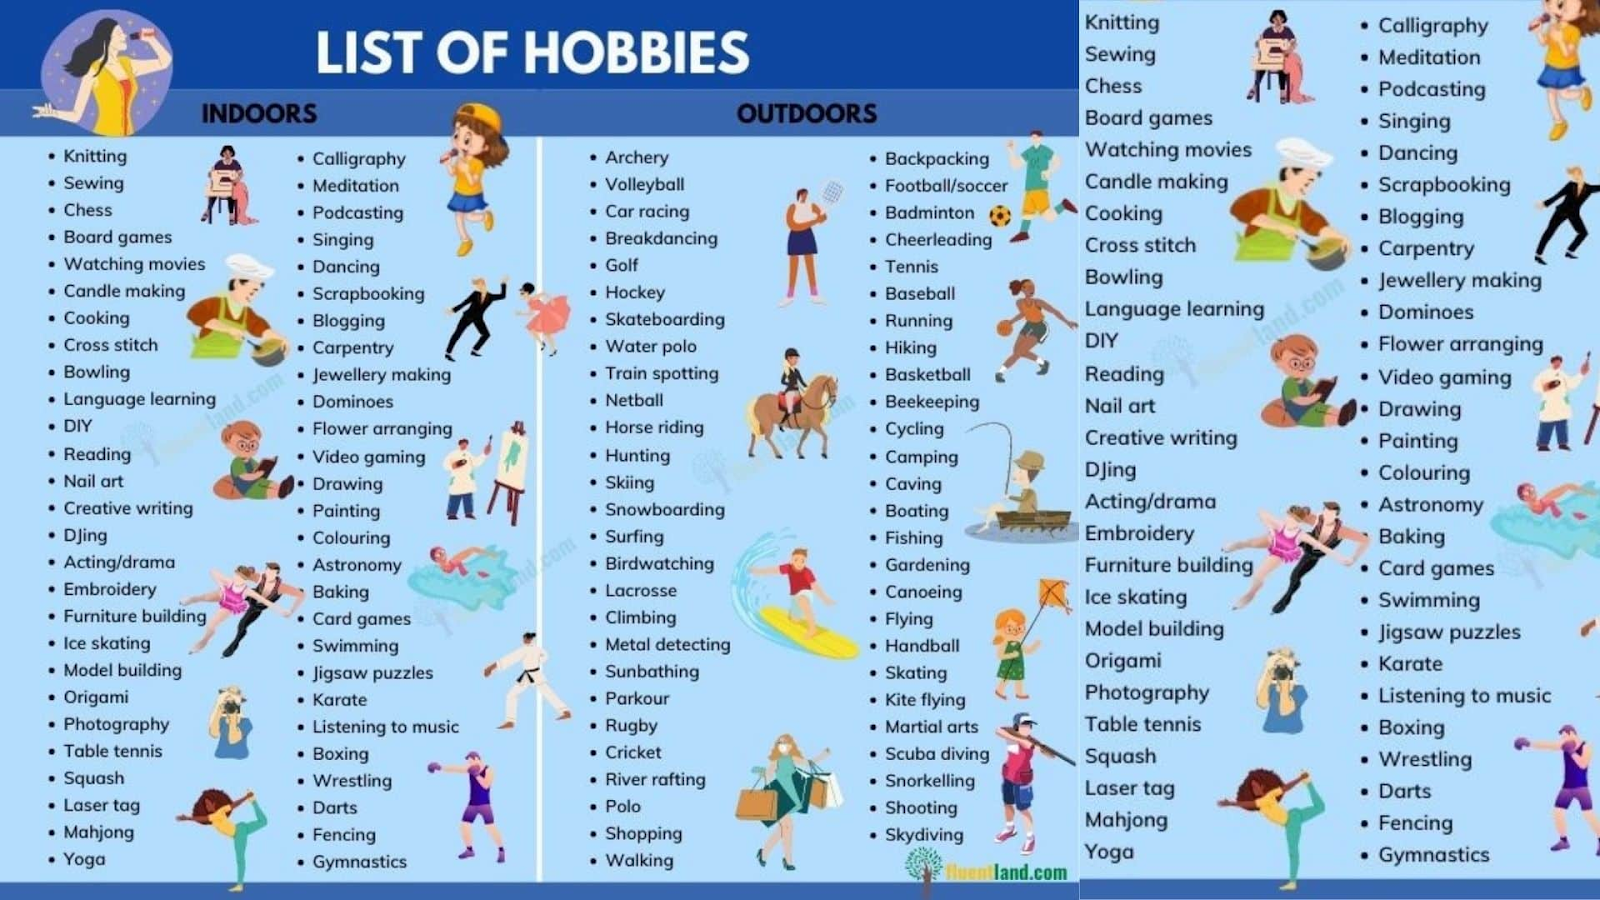 A mammoth list featuring numerous hobbies that could make interesting niches. 